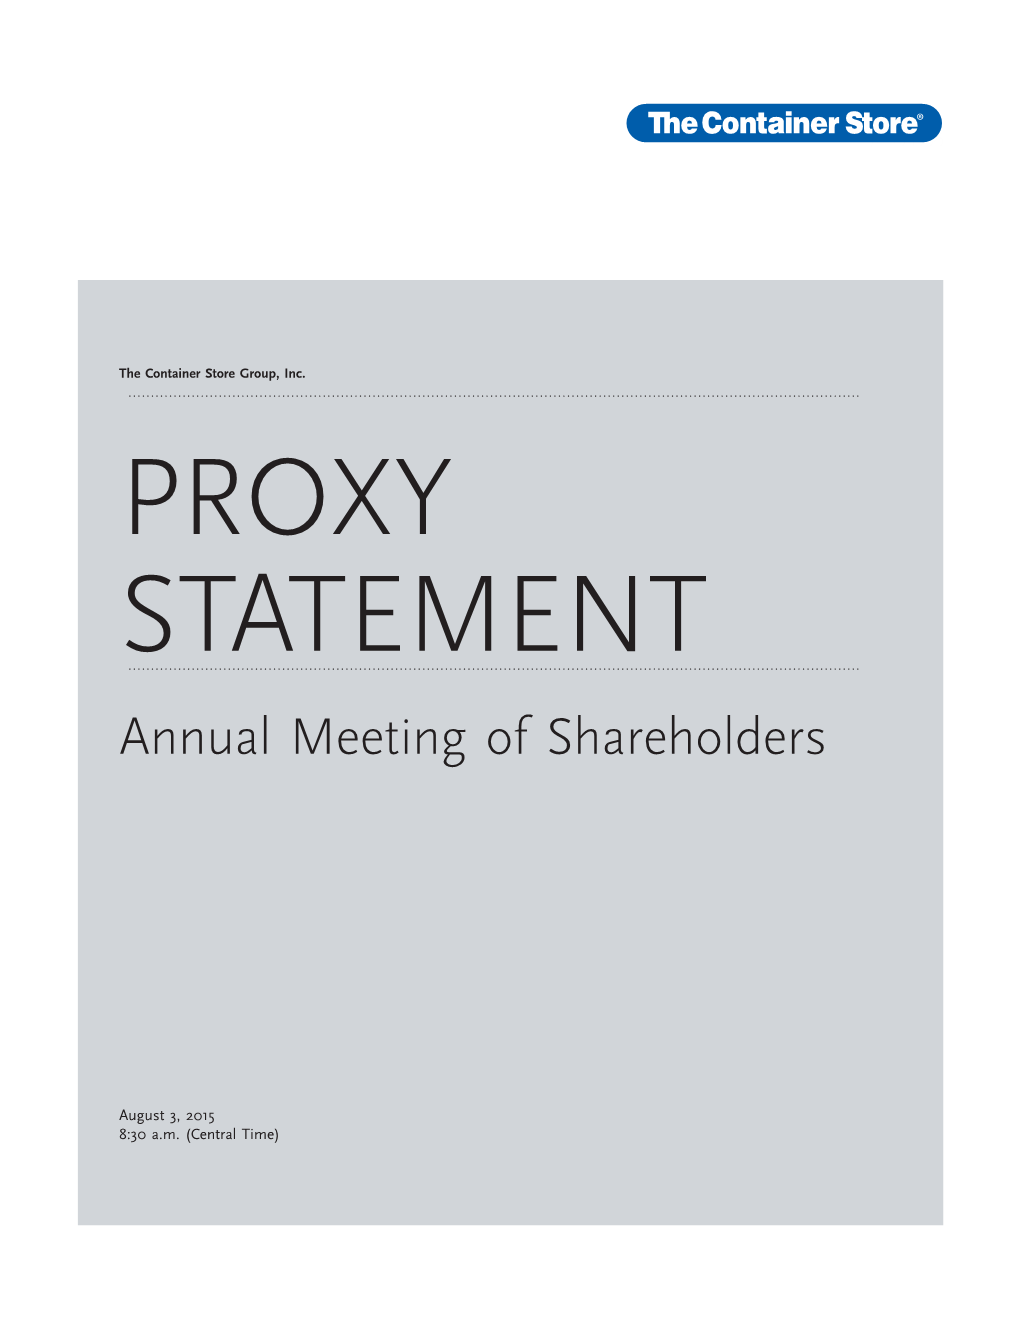 Proxy Statement on the Following Pages Describe the Matters to Be Presented at the Annual Meeting